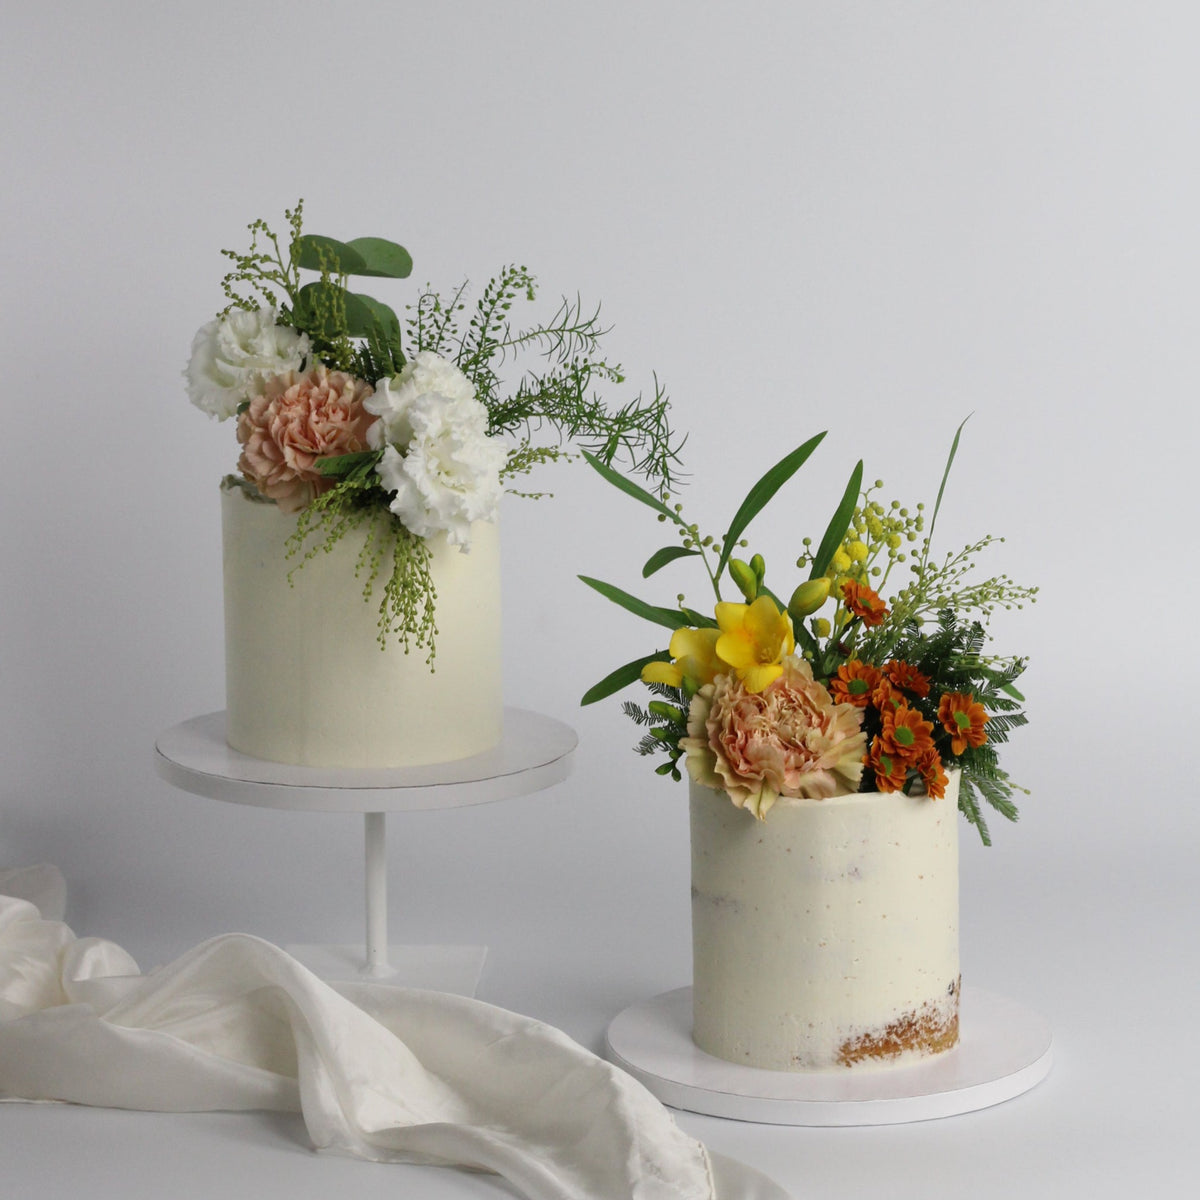 Floral Cutie Cake - Our signature semi-naked cake adorned with fresh flowers!